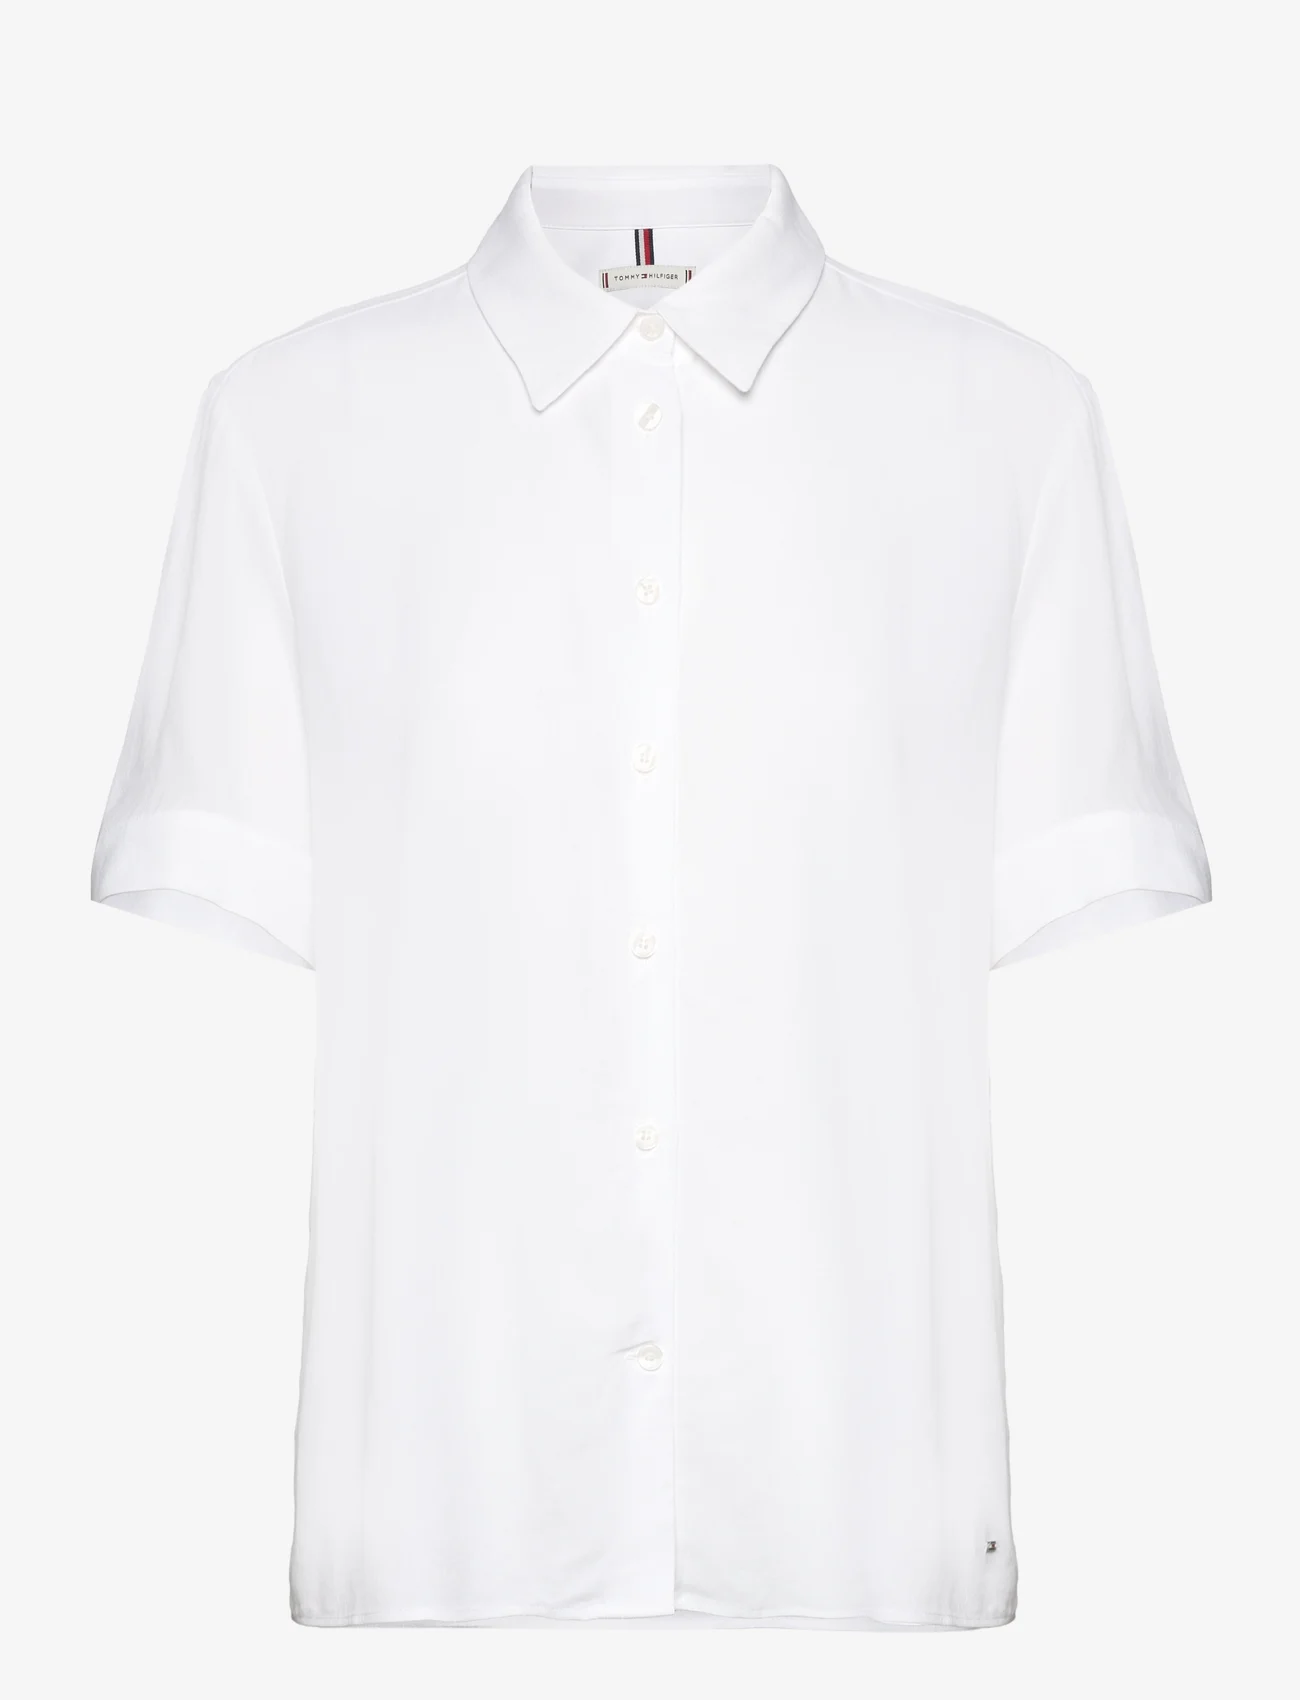 Tommy Hilfiger - ESSENTIAL FLUID SS SHIRT - short-sleeved shirts - th optic white - 0